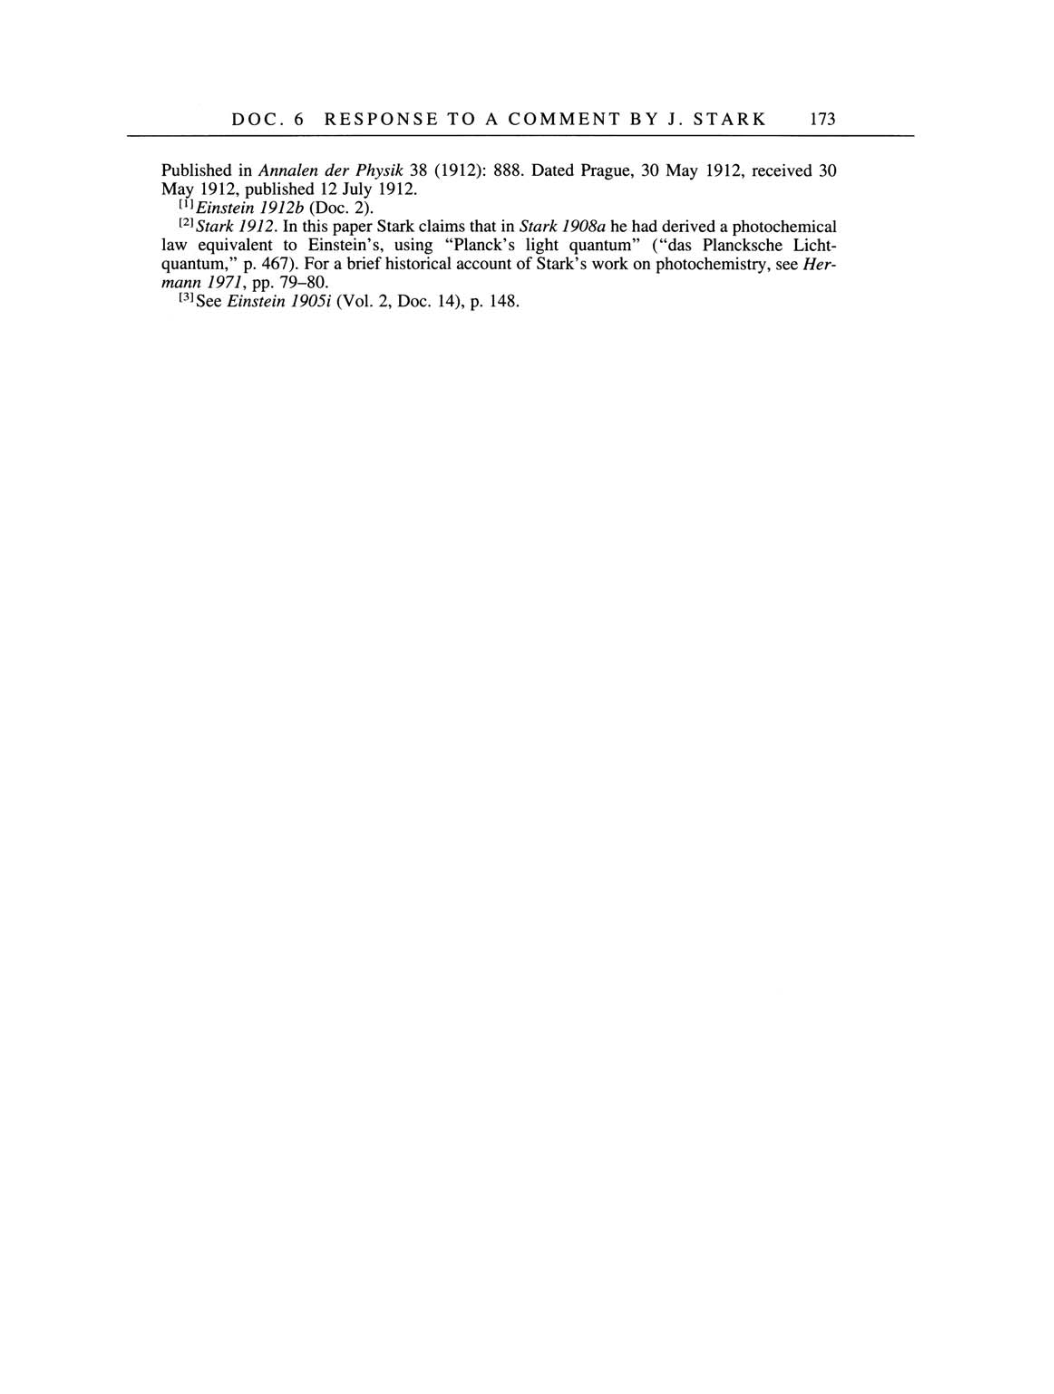 Volume 4: The Swiss Years: Writings 1912-1914 page 173